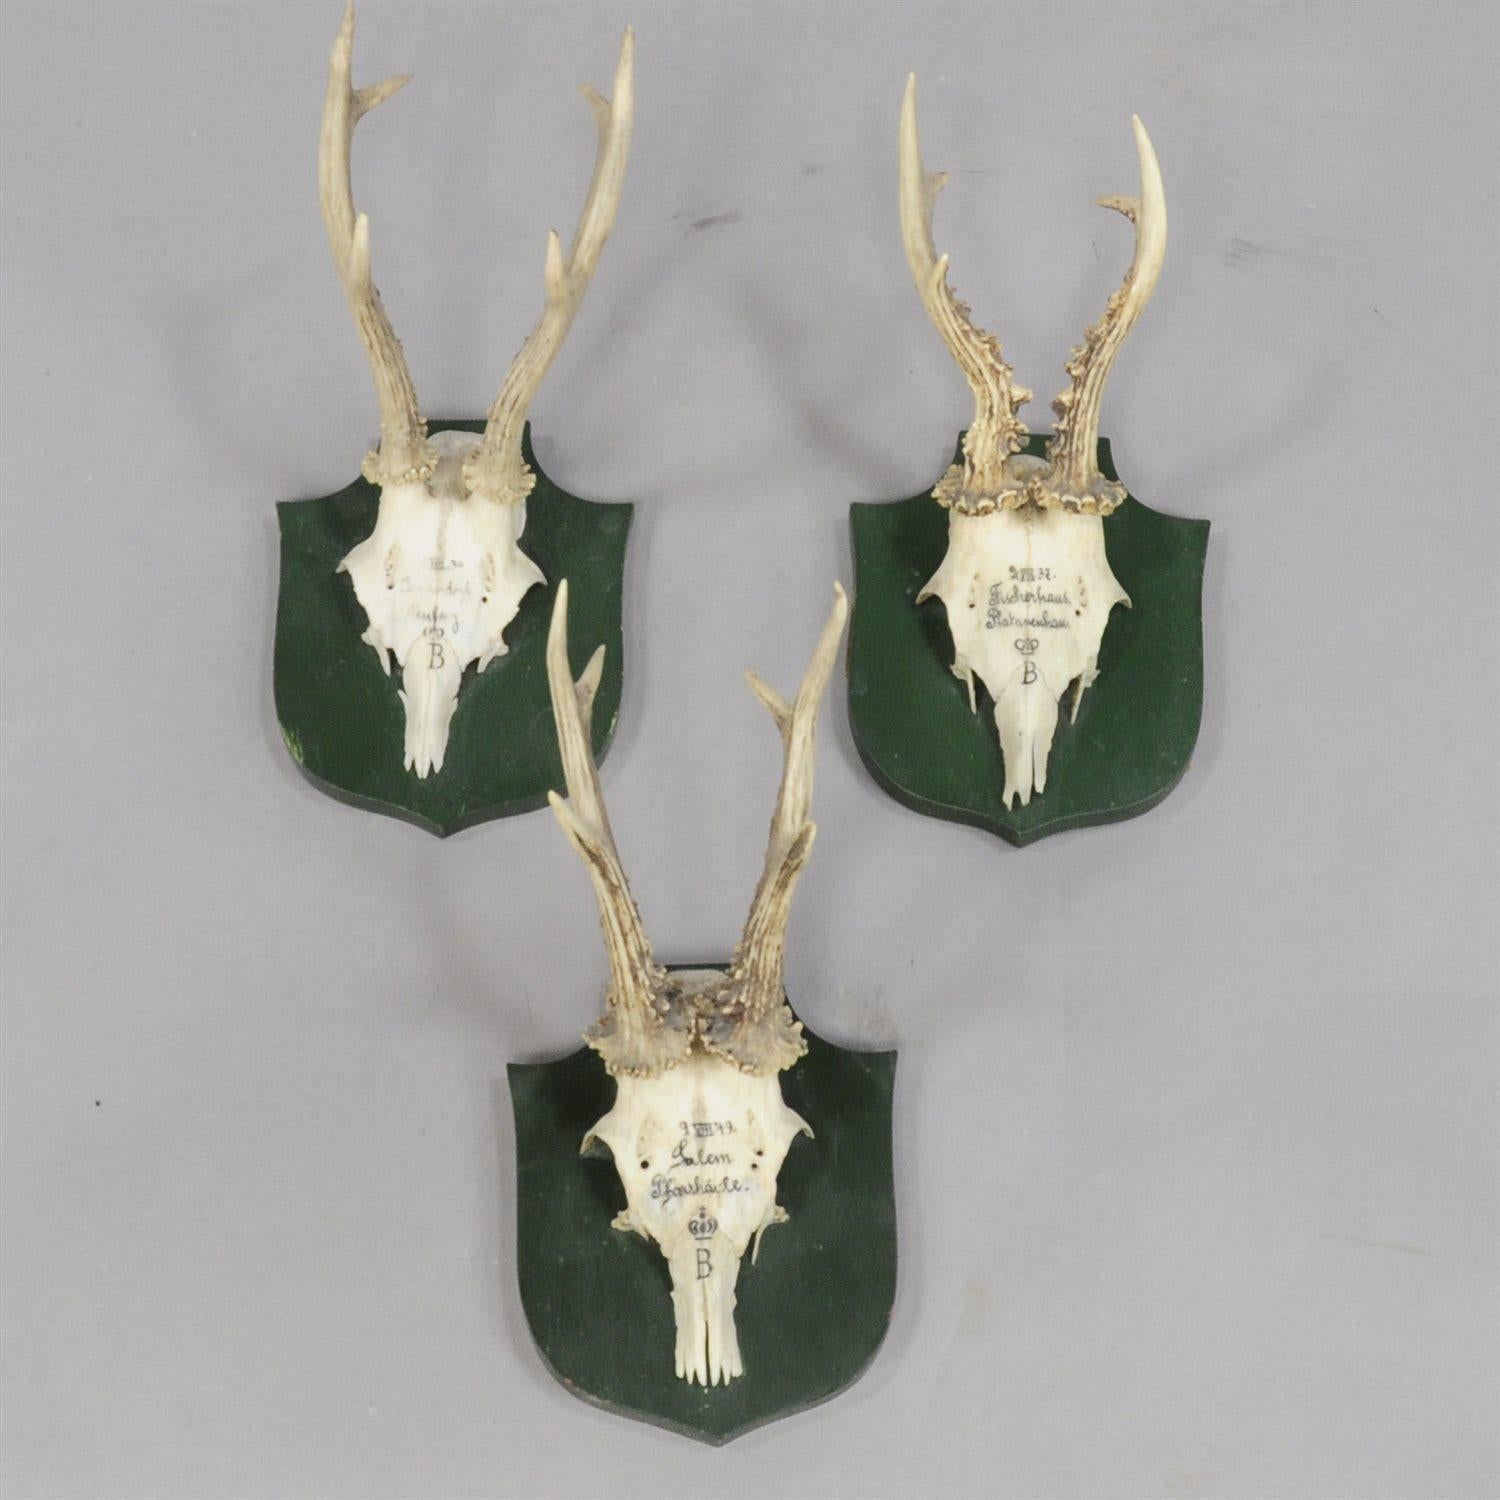 Rustic Set of Six Deer Trophies from Palace Salem, Germany